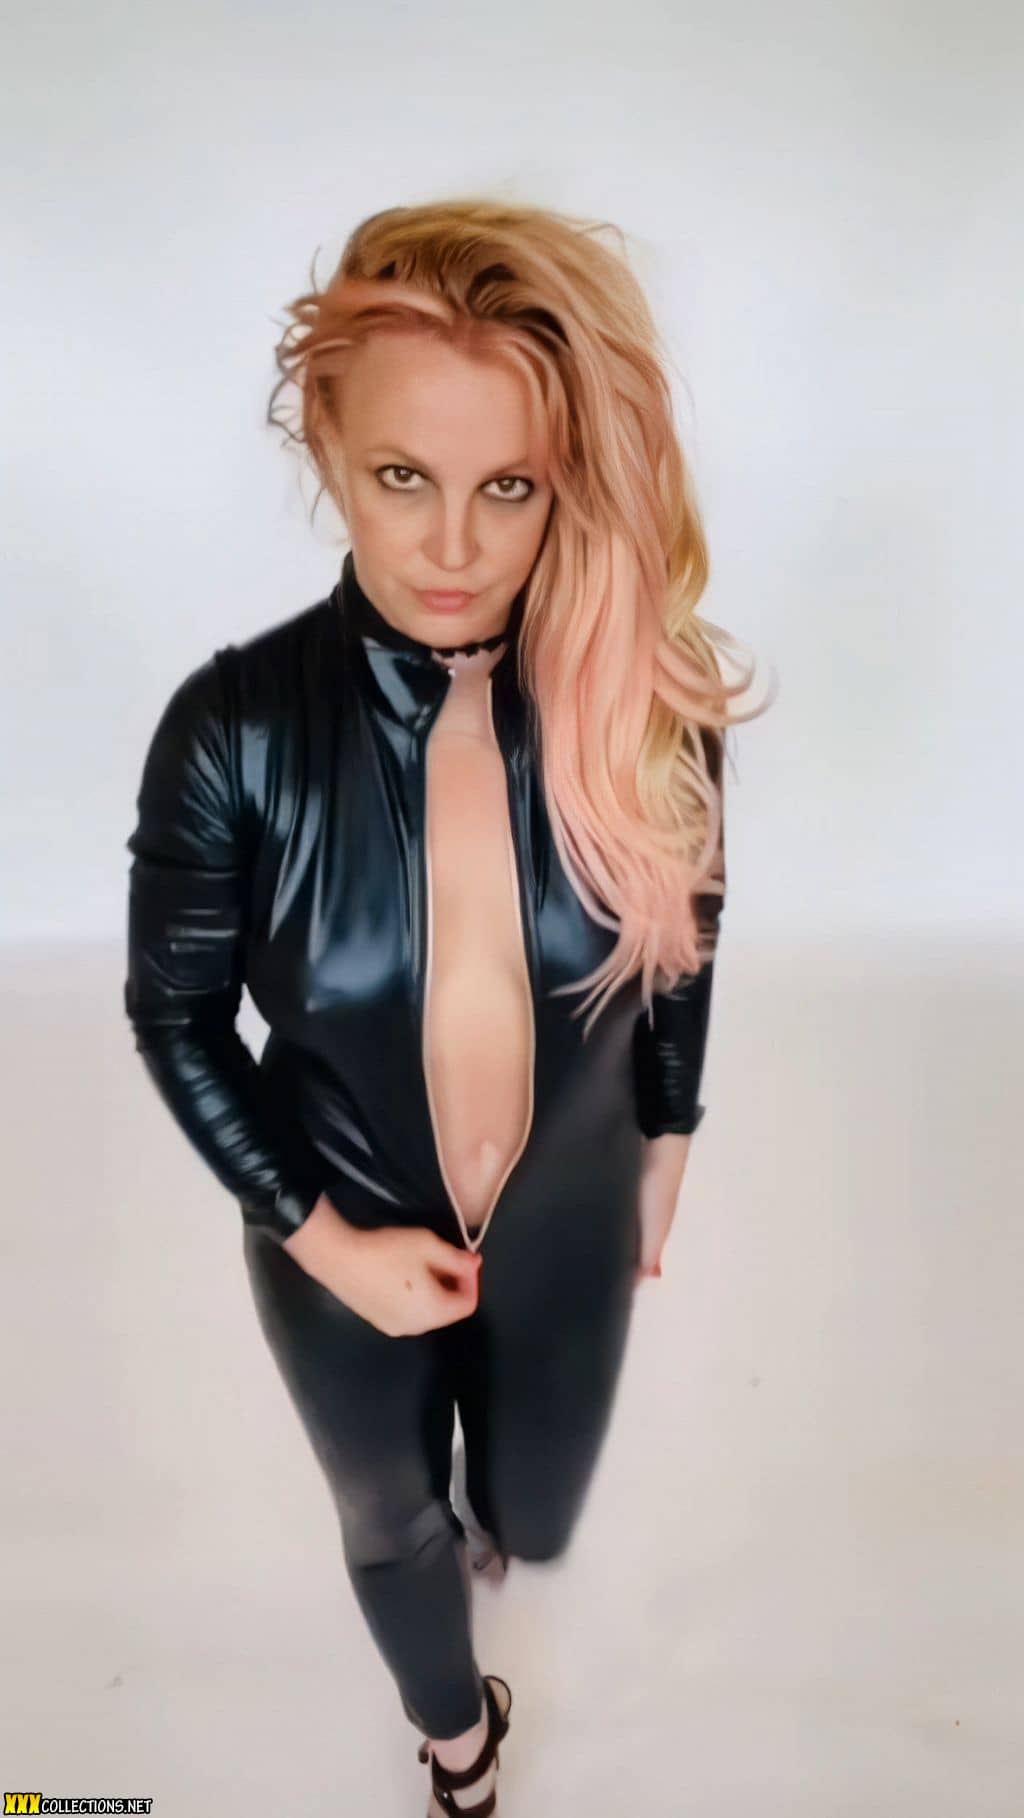 Britney Spears Leather Porn - Britney Spears Black Catsuit Dance Tease 4K UHD Video Download